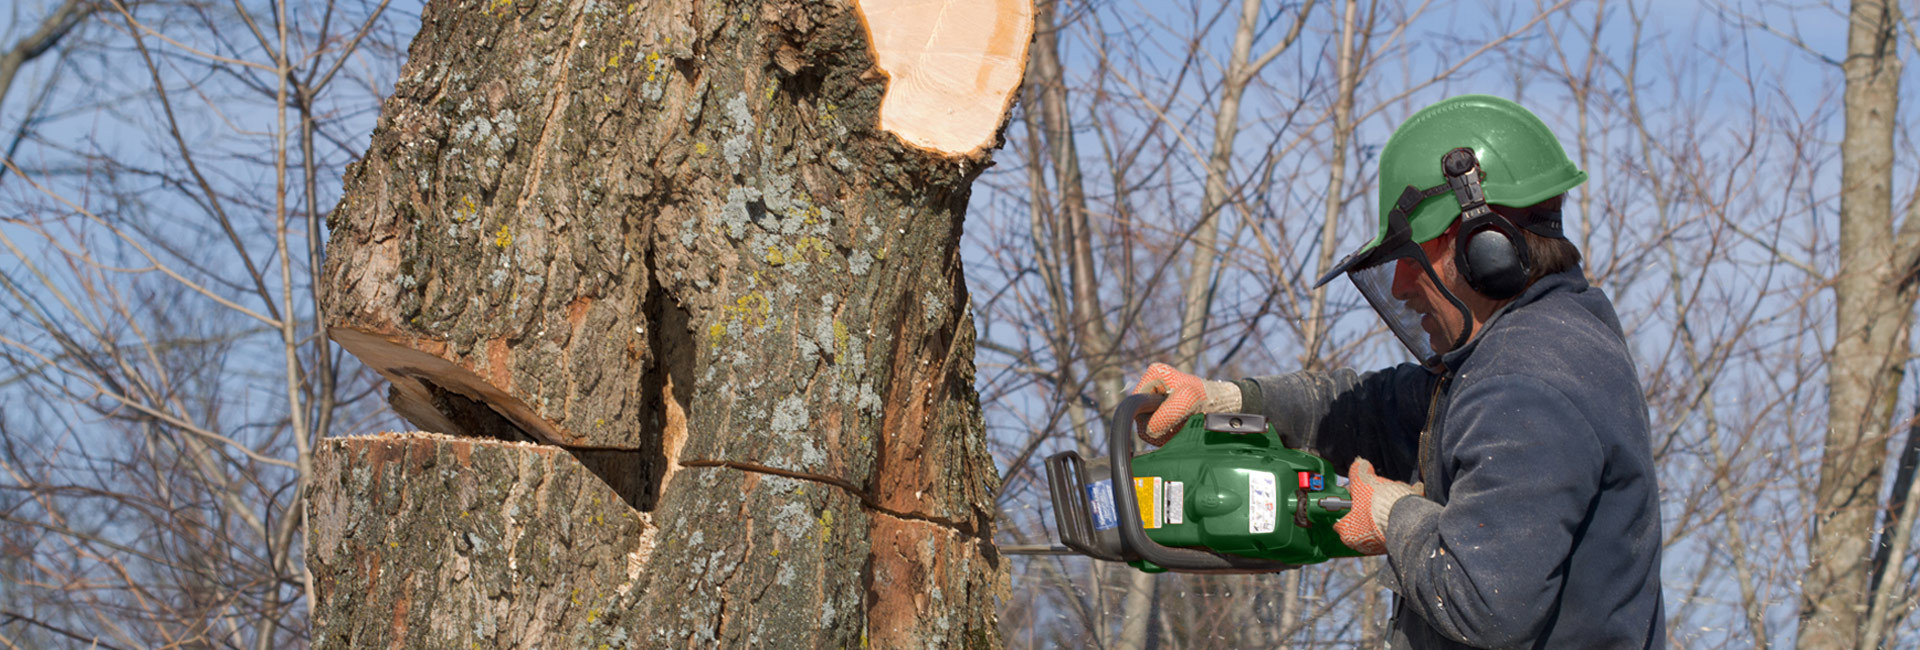 An Arborist Cutting Tree With Chainsaw